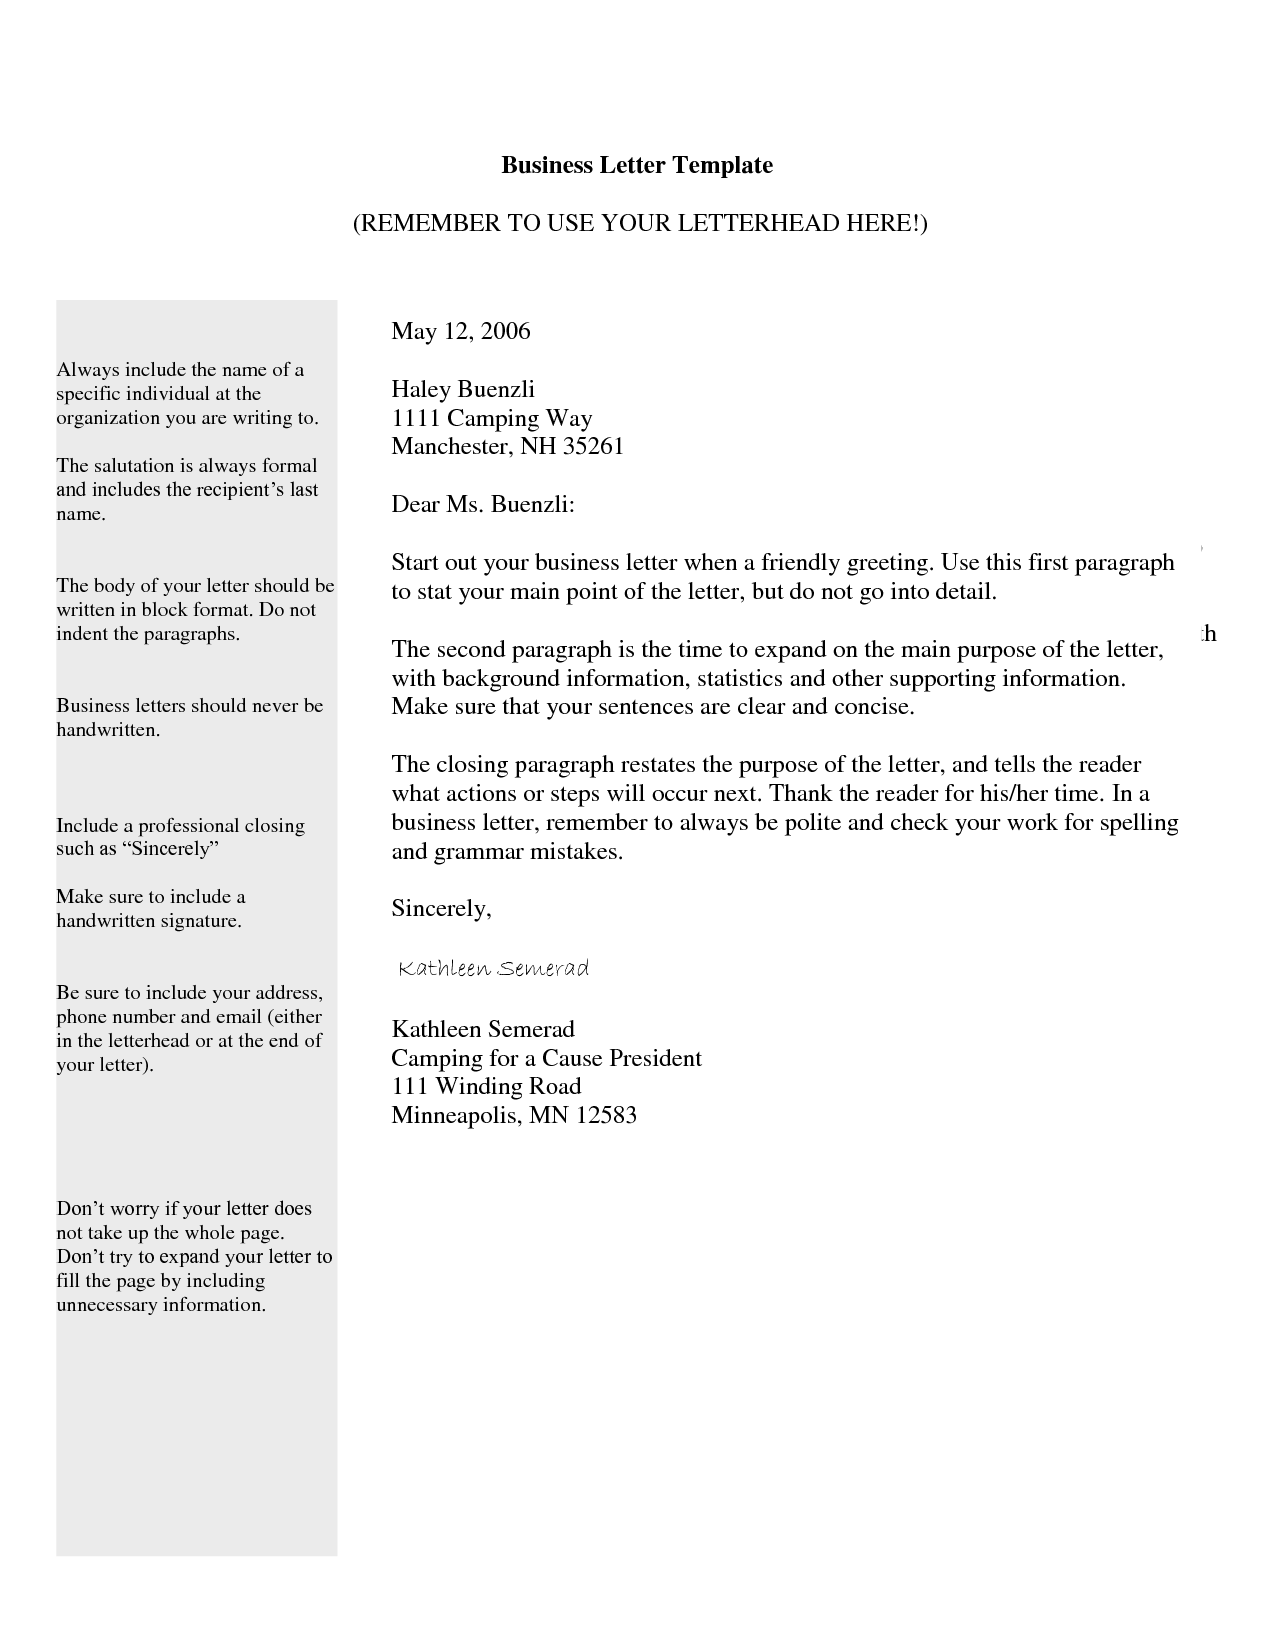 Free printable business letter template microsoft word